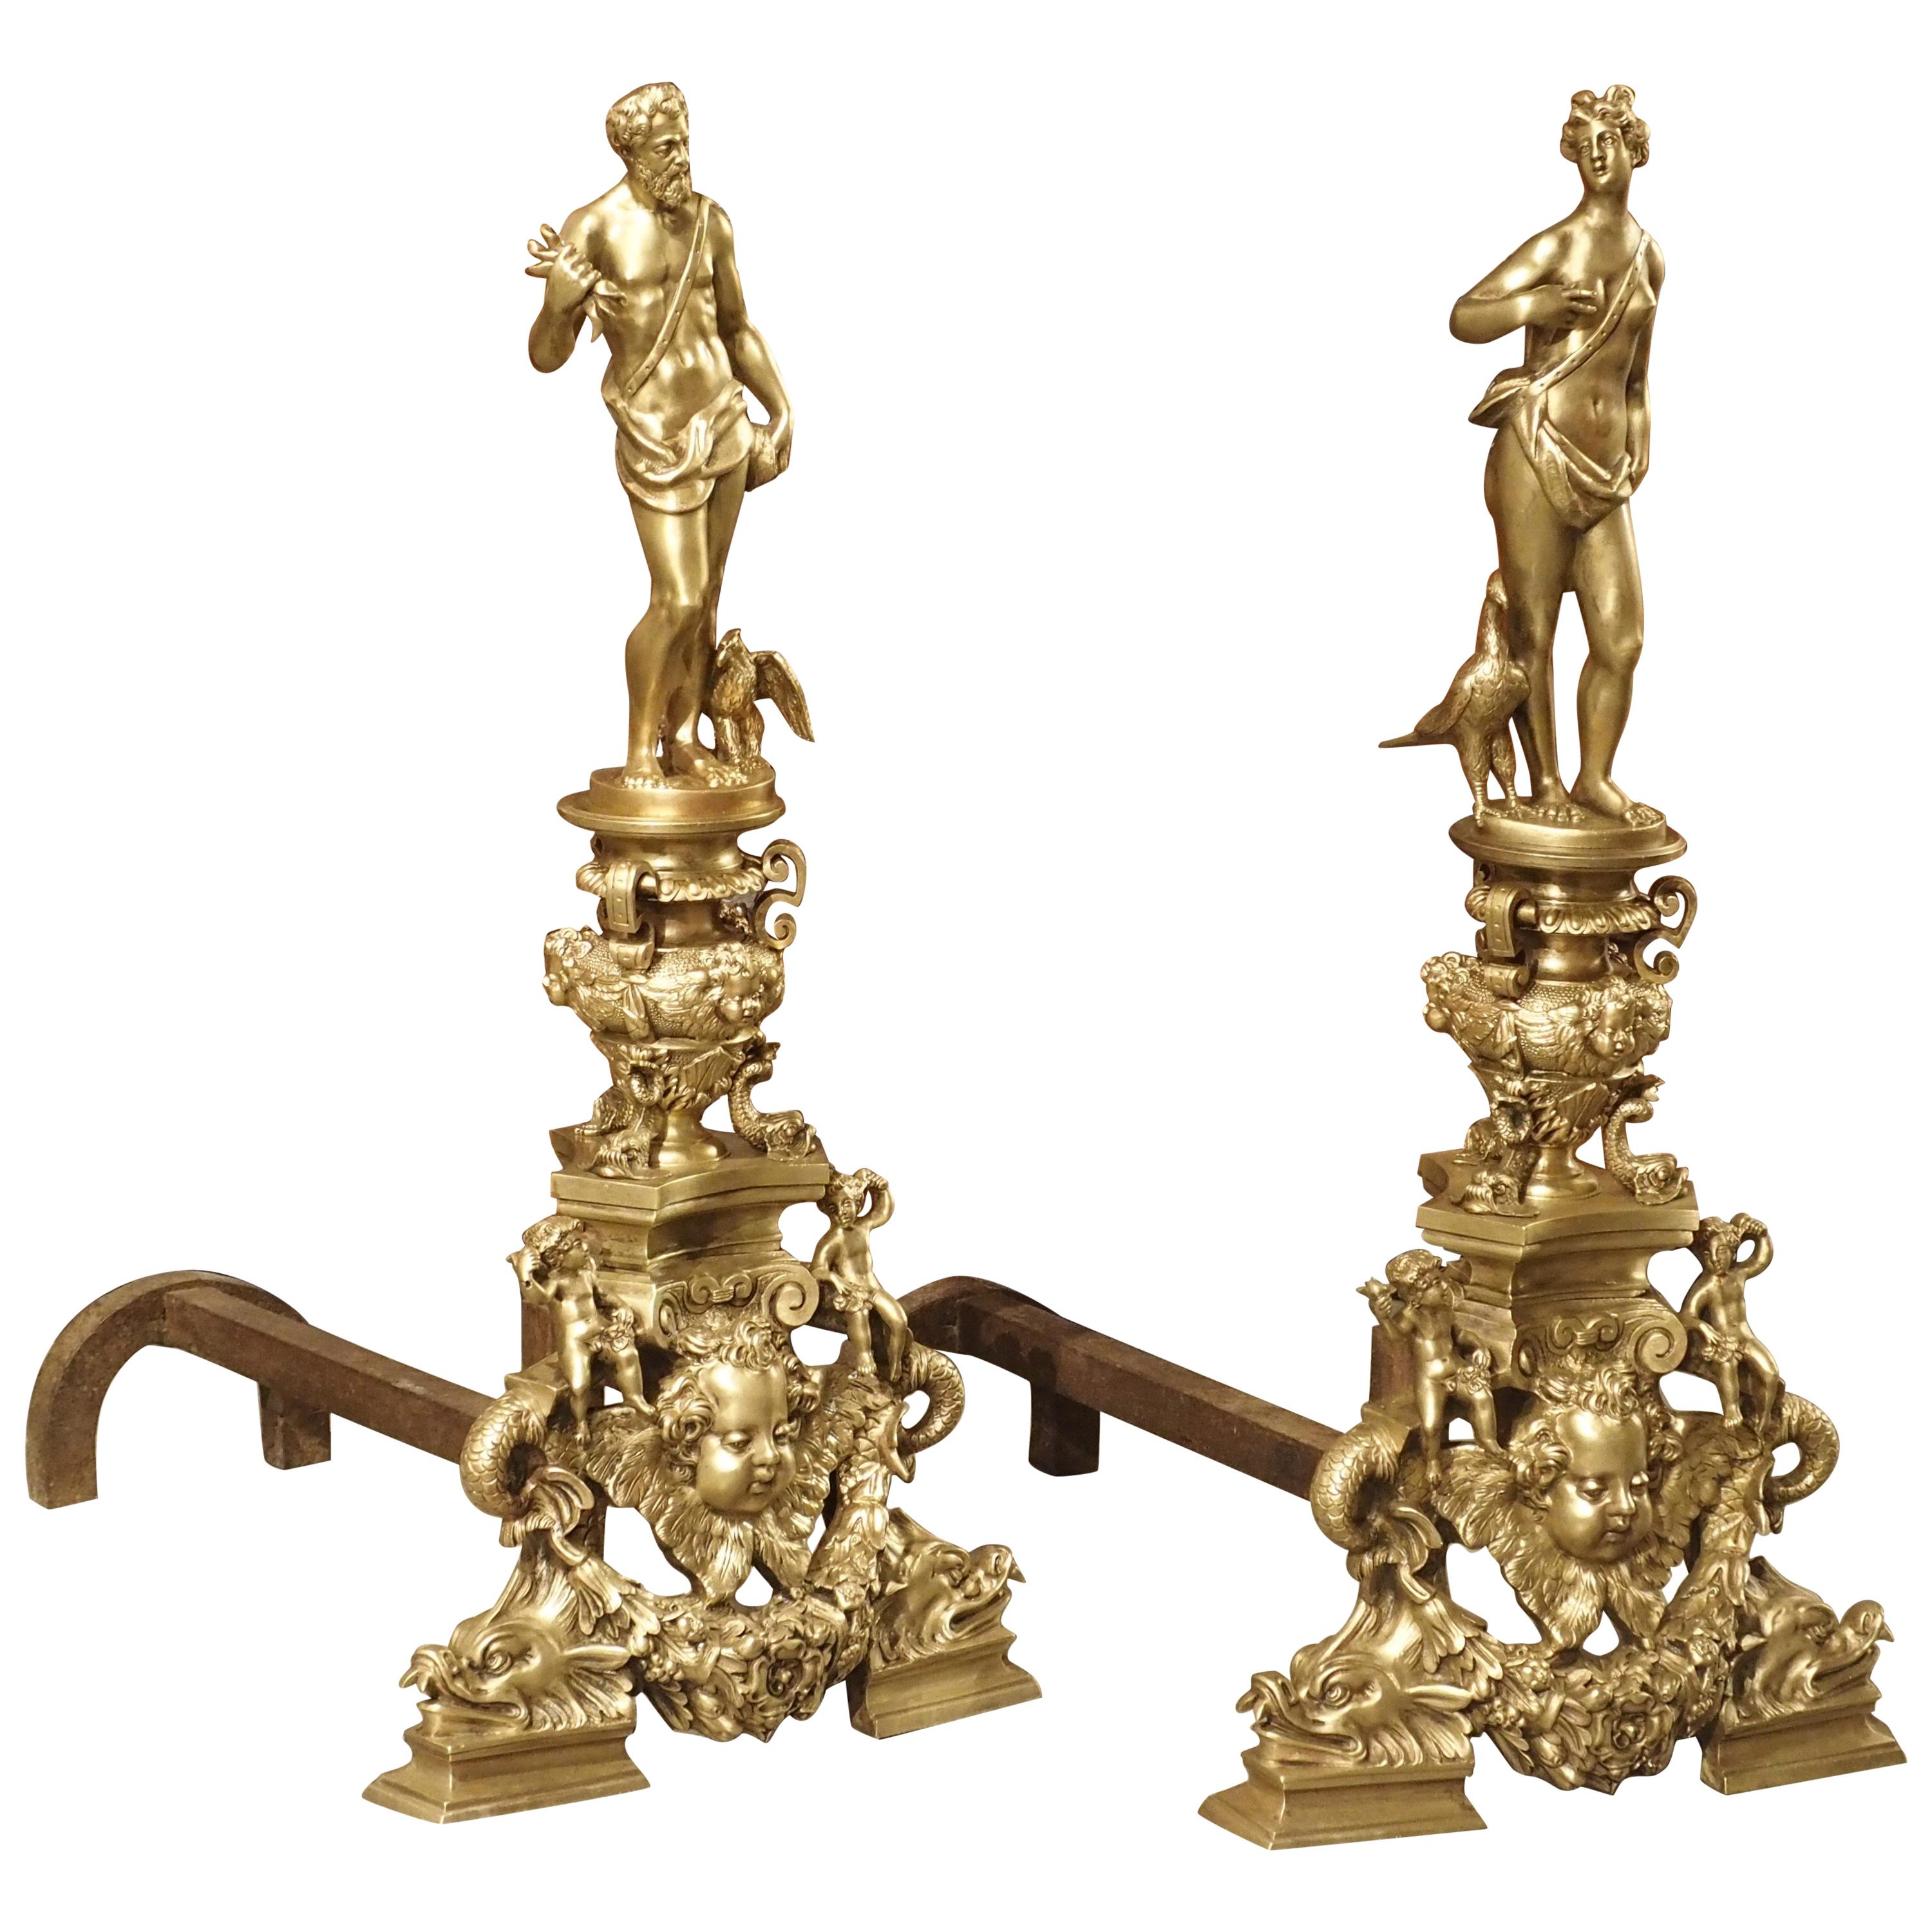 Pair of Antique French Gilt Bronze Andirons by Bouhon Freres, Paris 19th Century